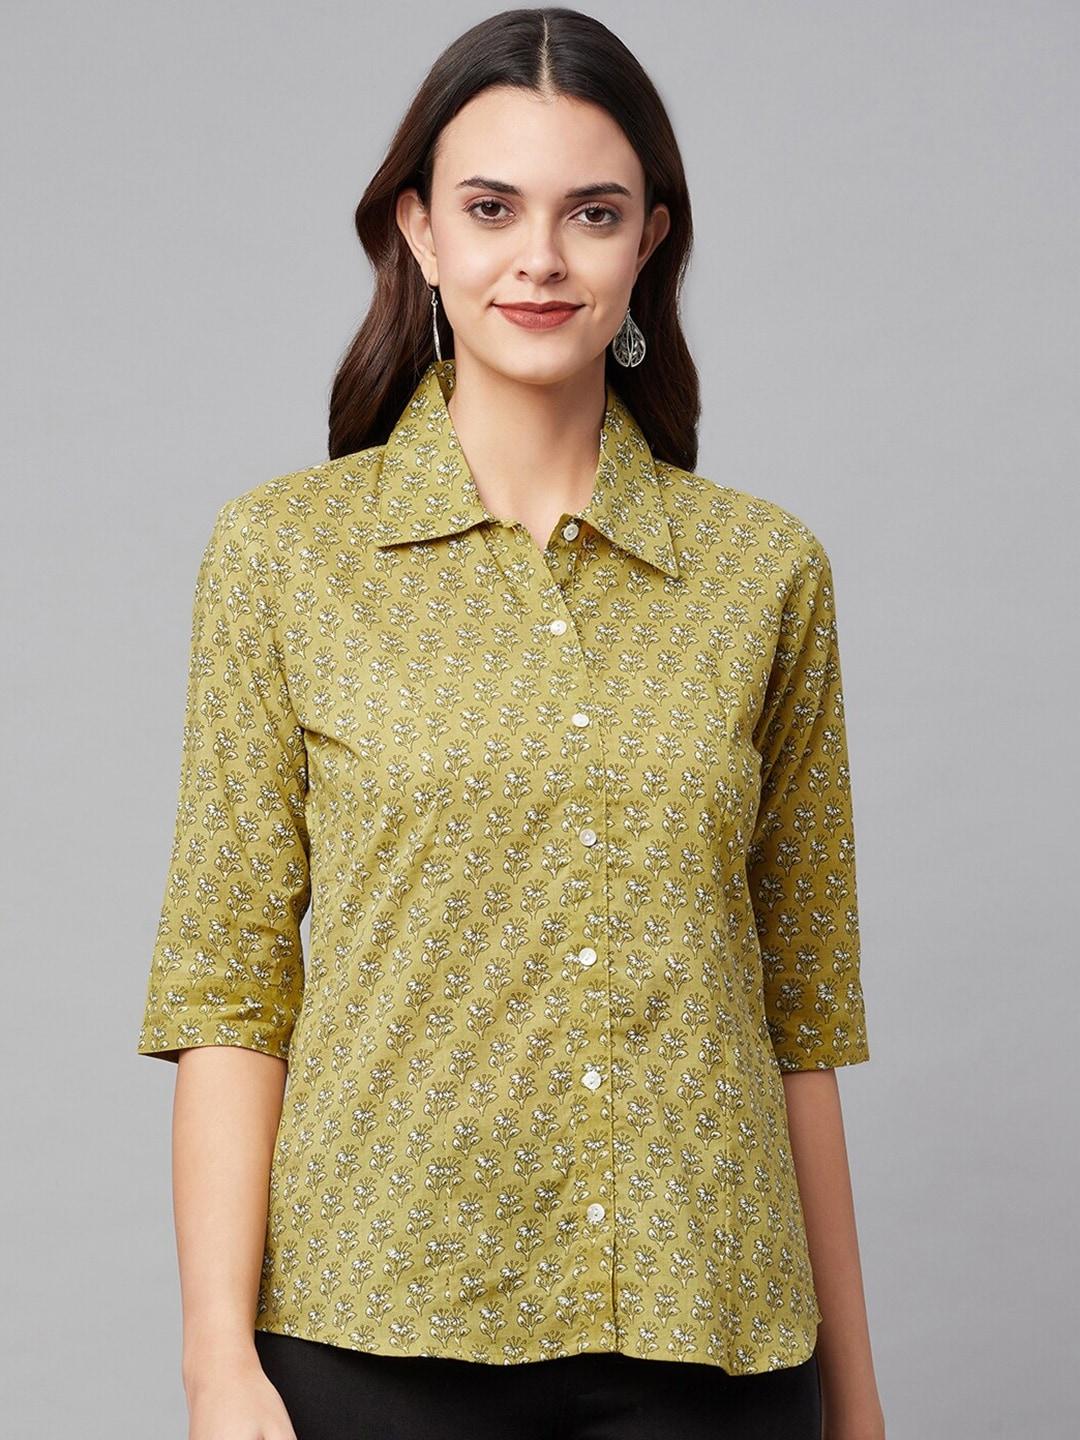 kalini comfort floral printed spread collar three-quarter sleeves cotton casual shirt